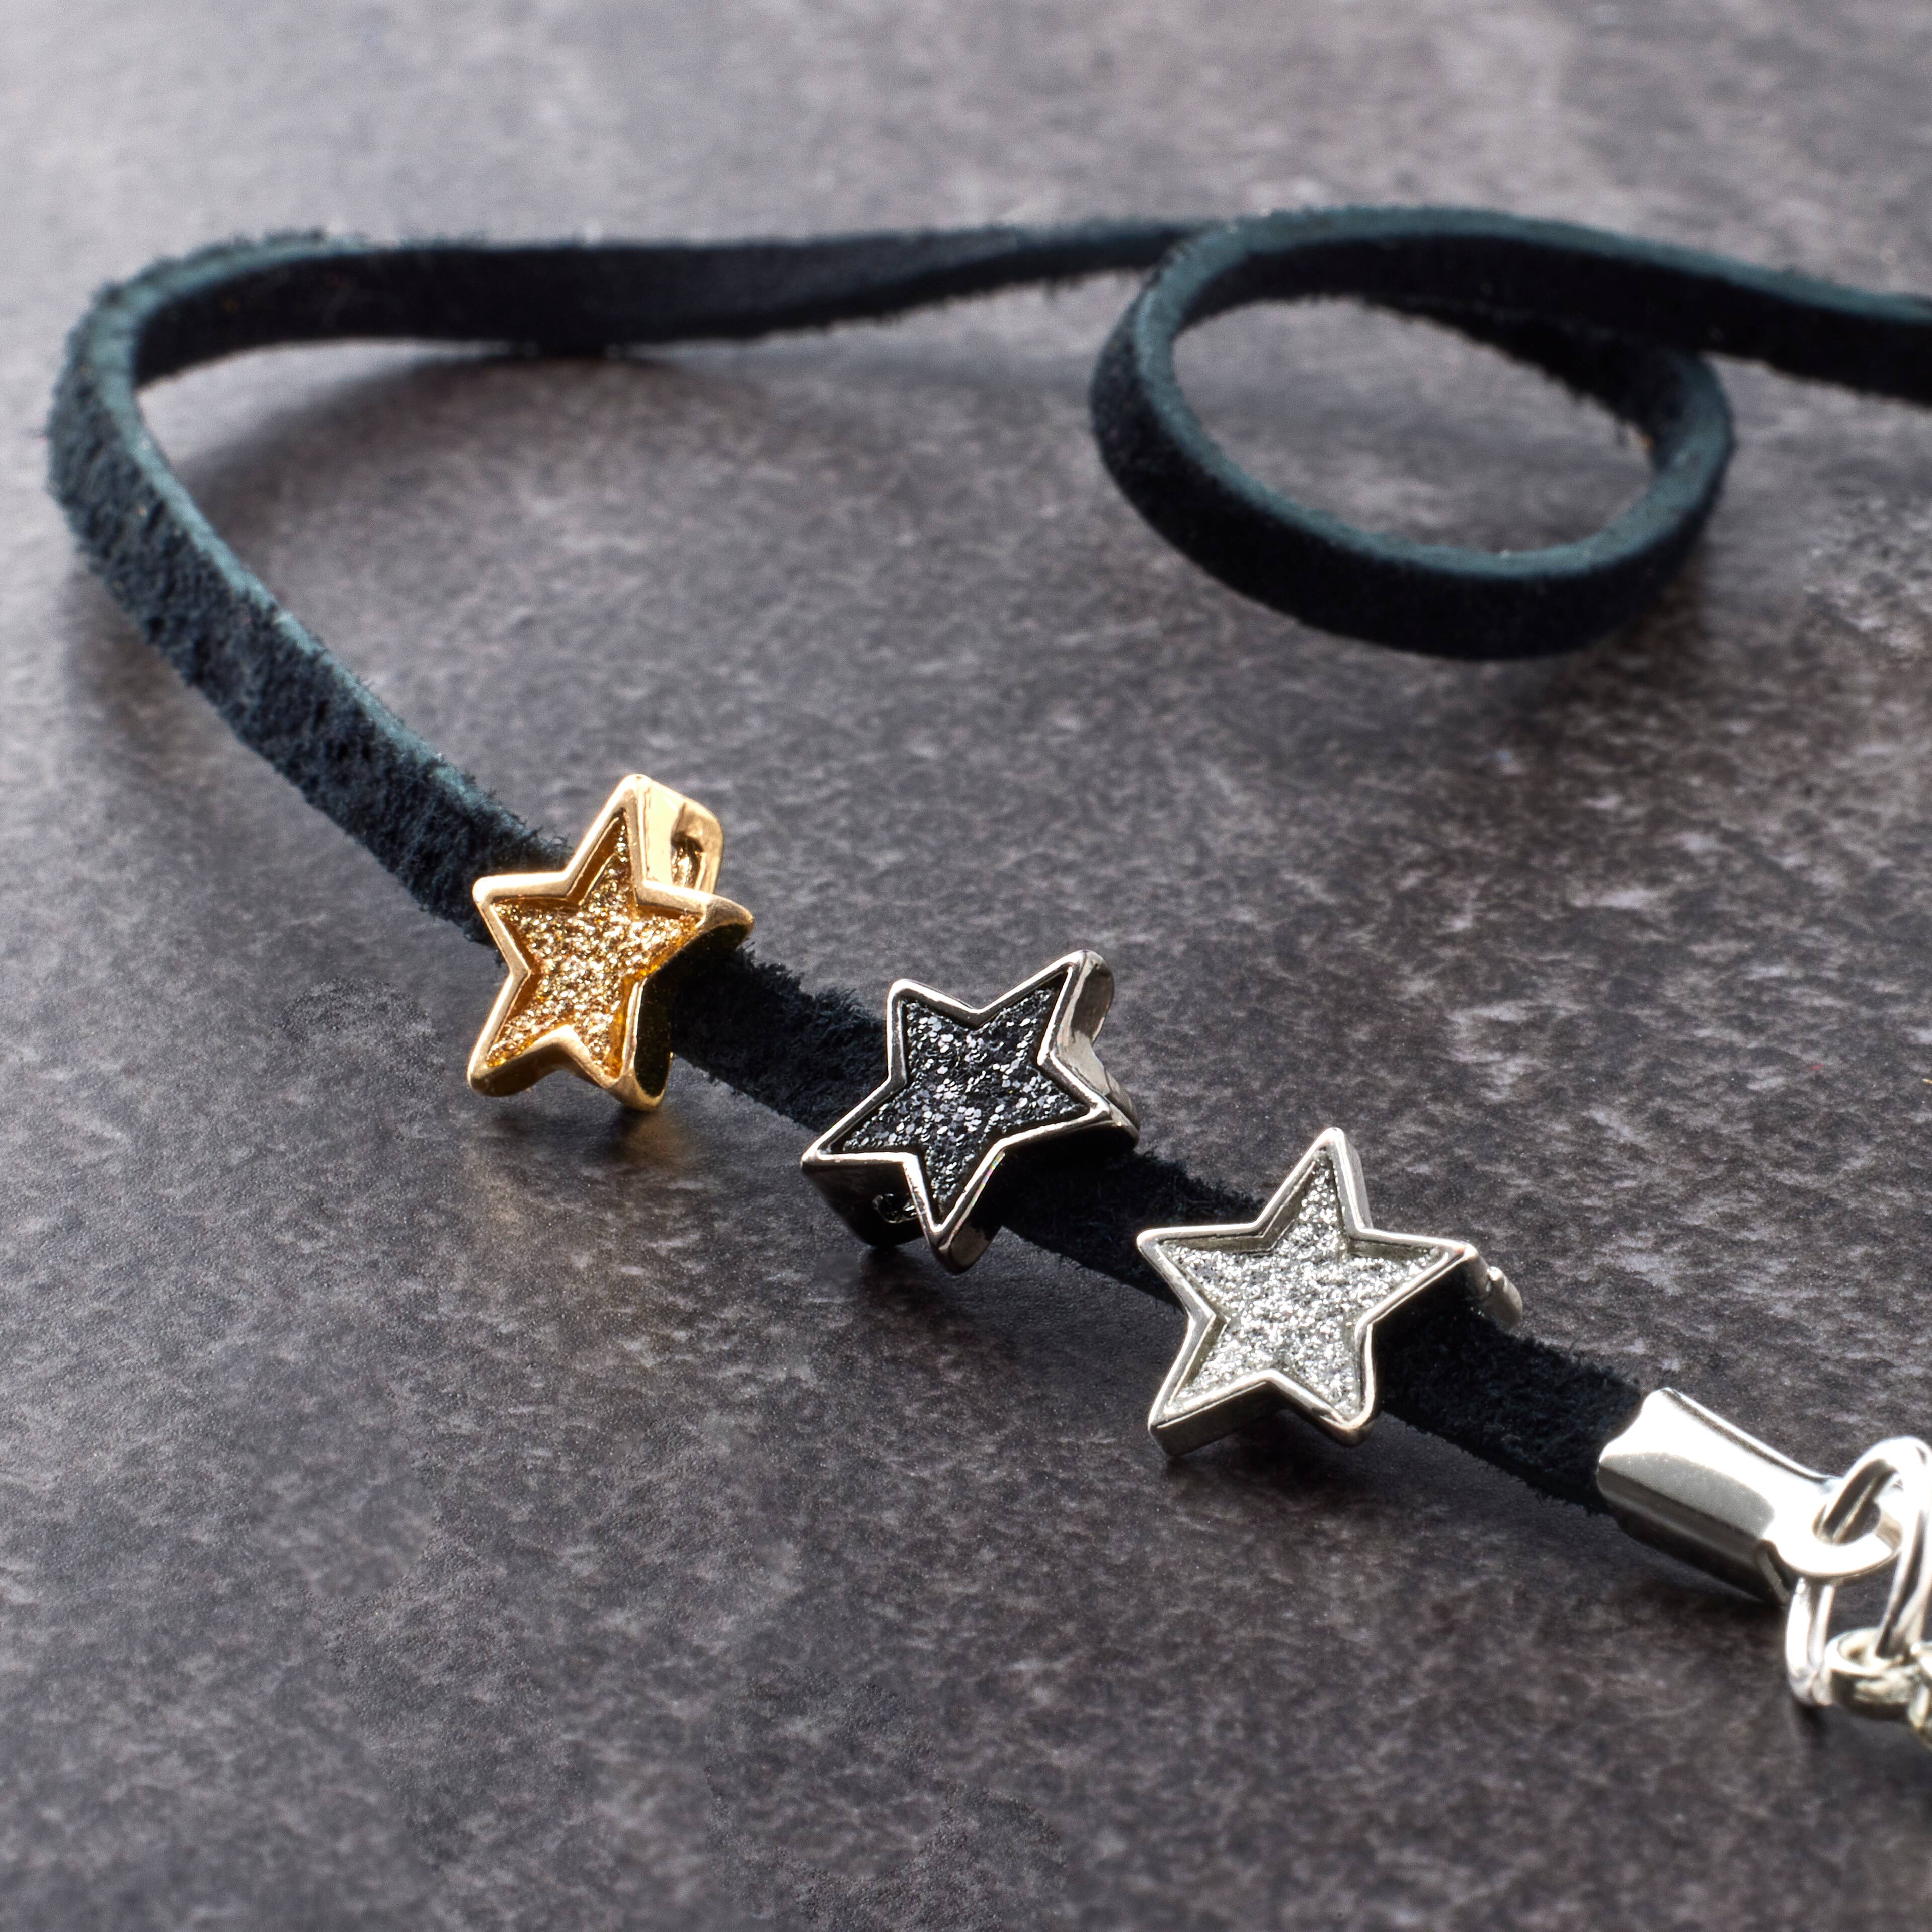 Shimmery gray resin star with gold center